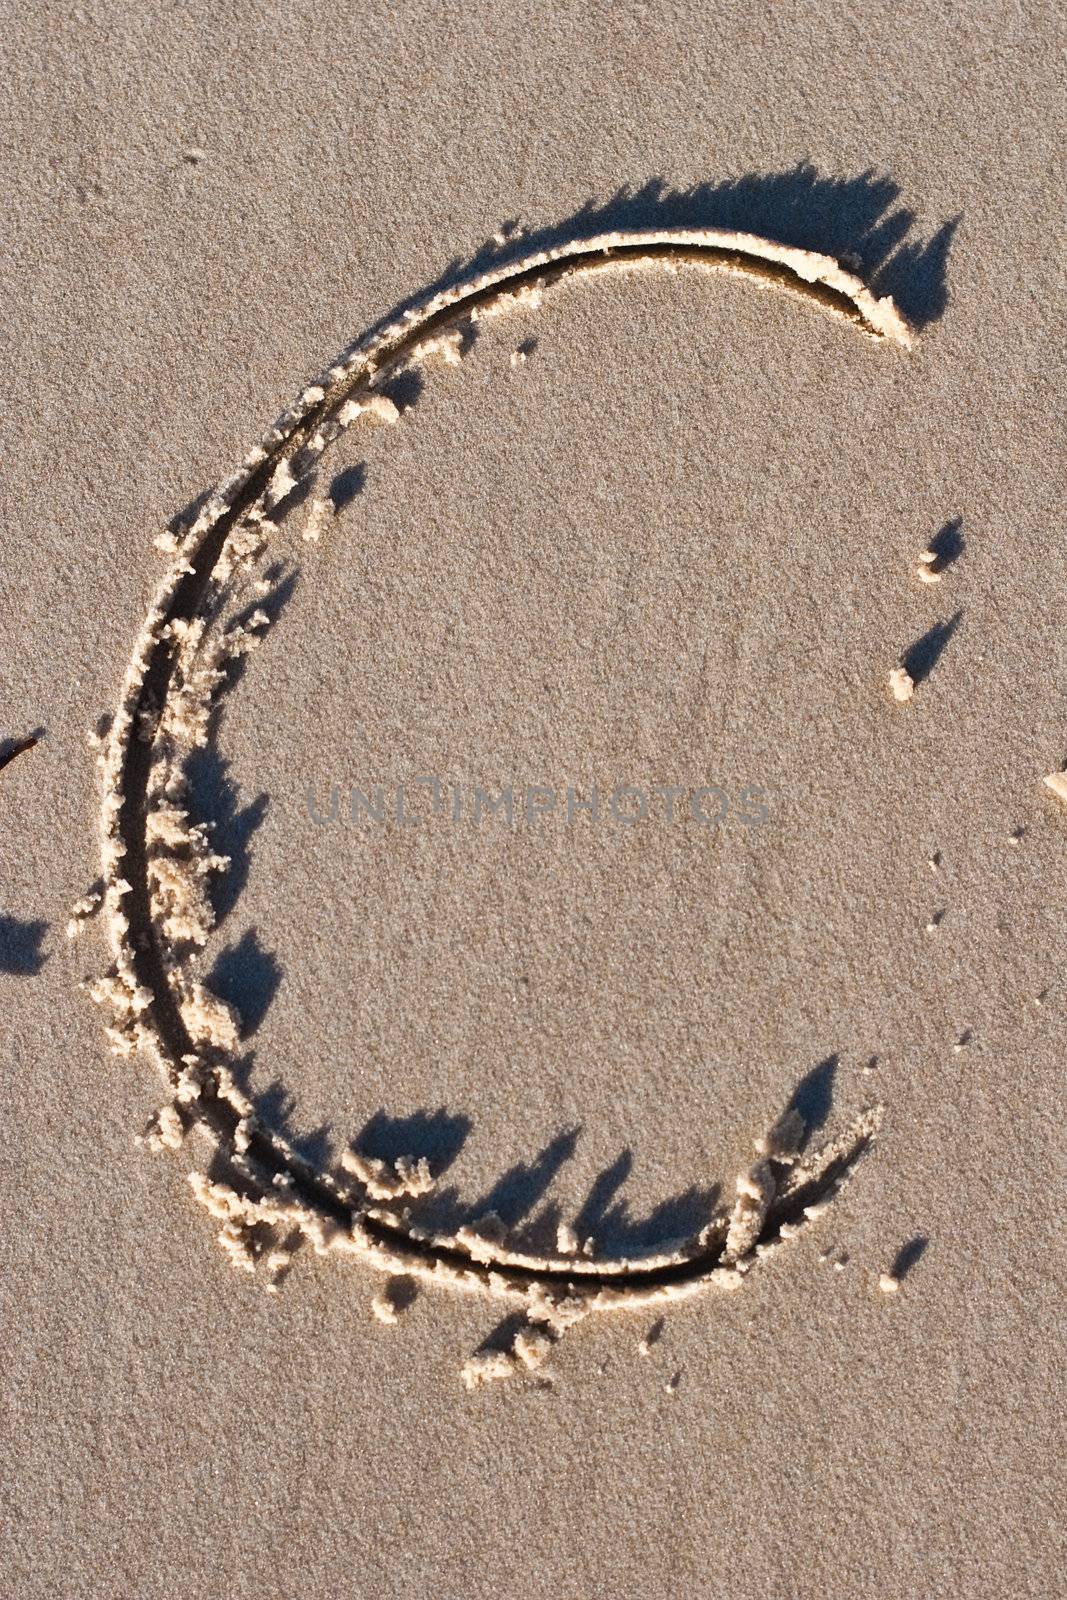 Letter C drawn in the Sand